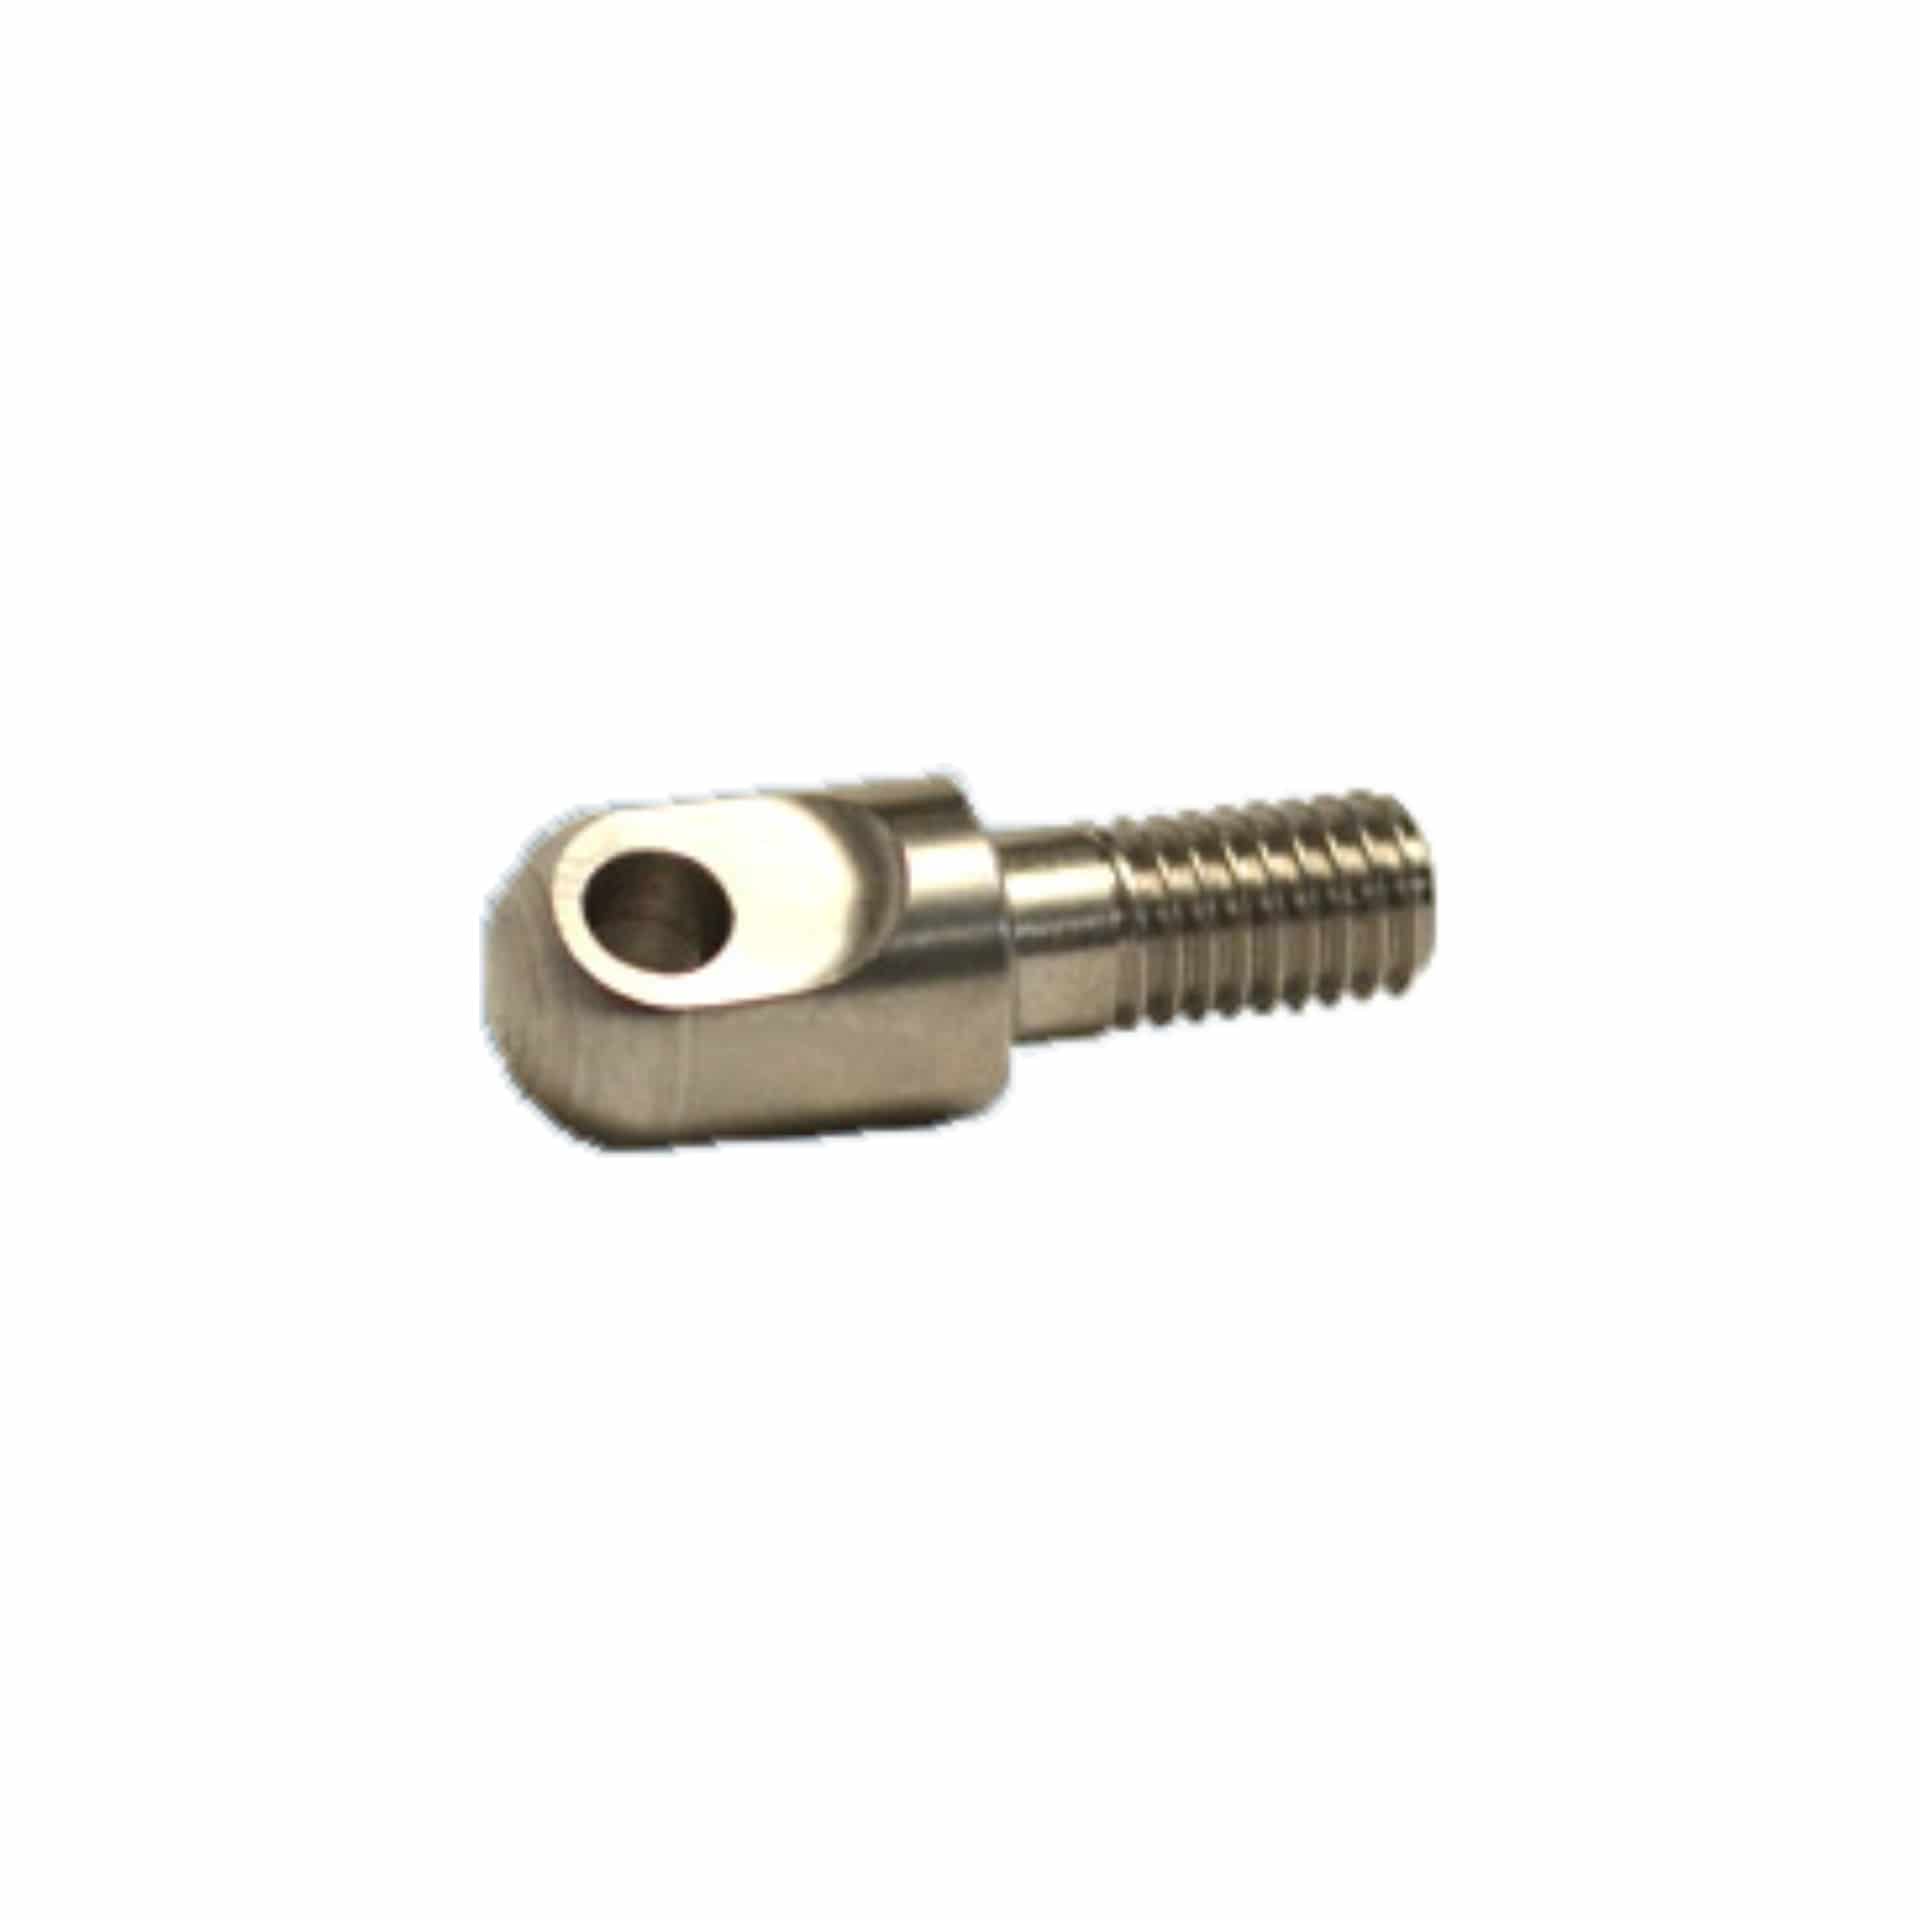 HW100 Front QD stud. Stainless Steel 13